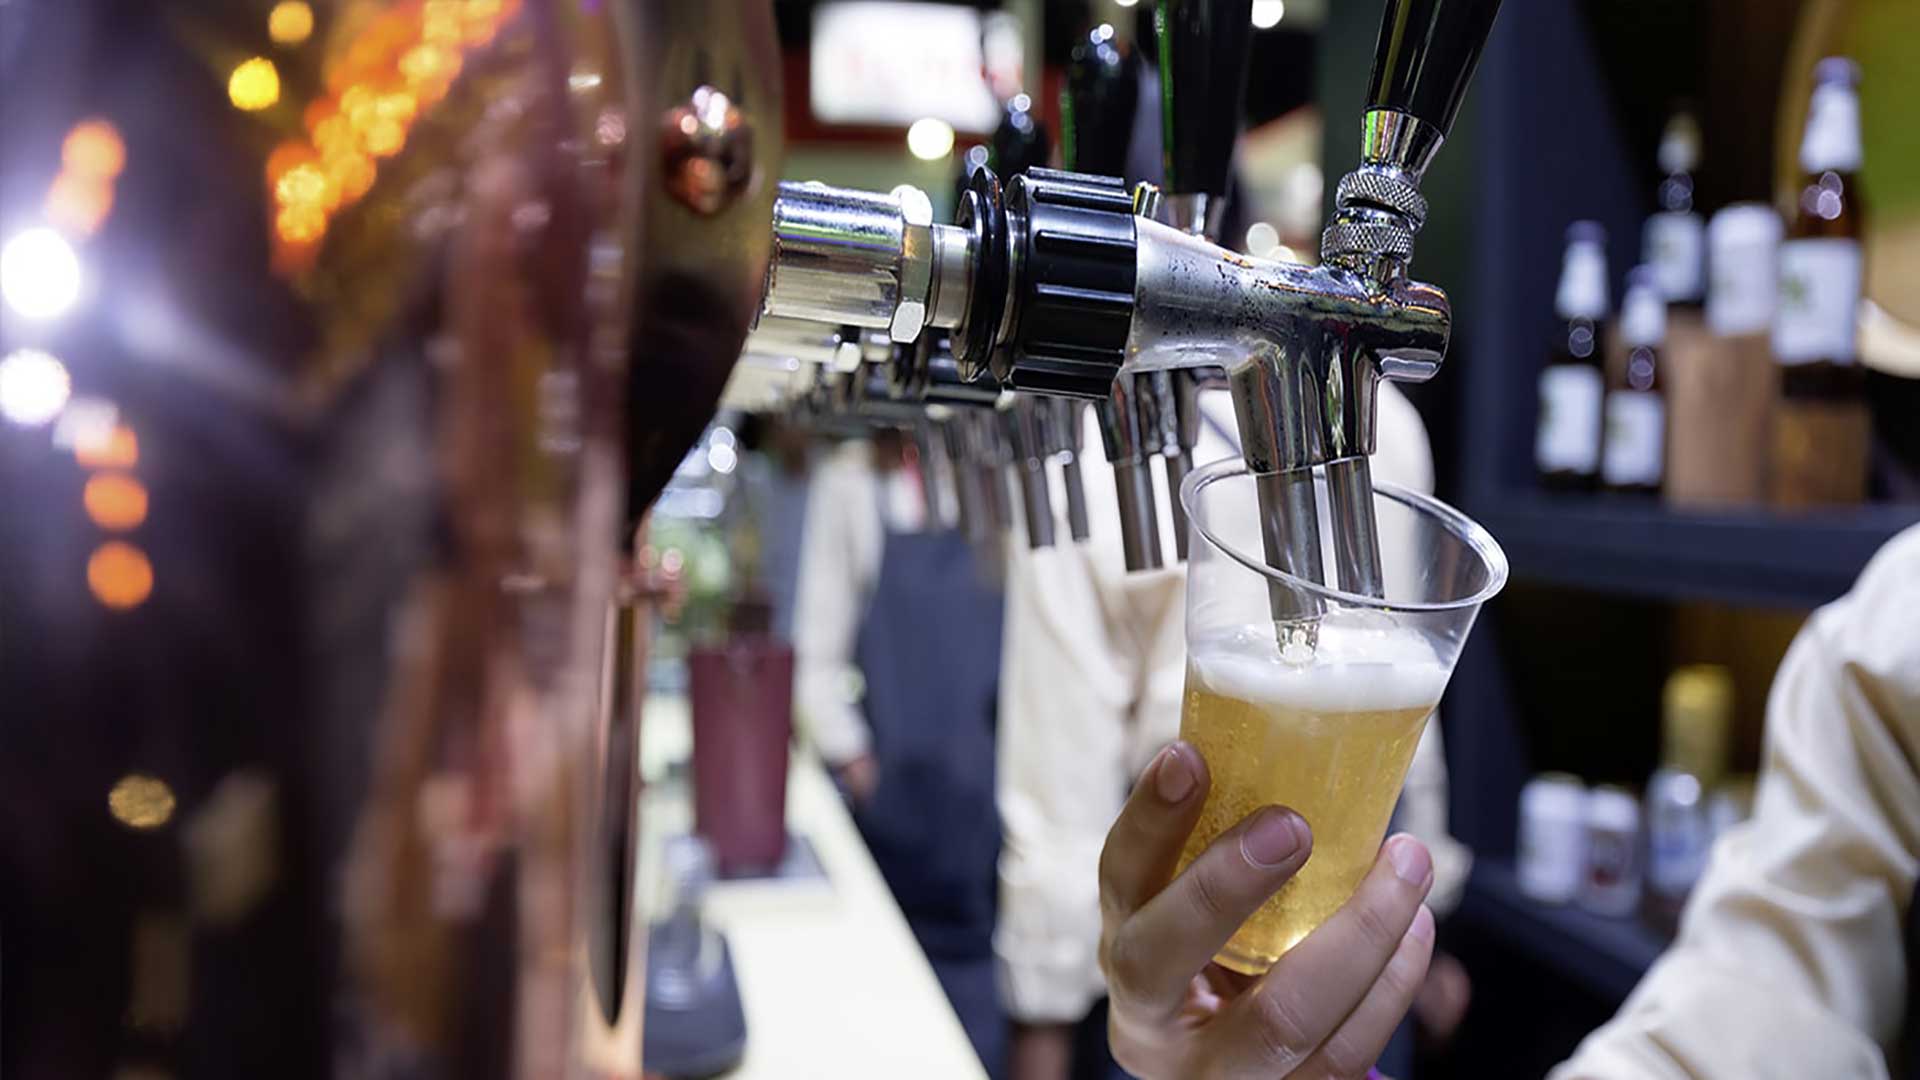 Hand holding a clear plastic cup filled with beer under a beverage dispensing nozzle in a bar